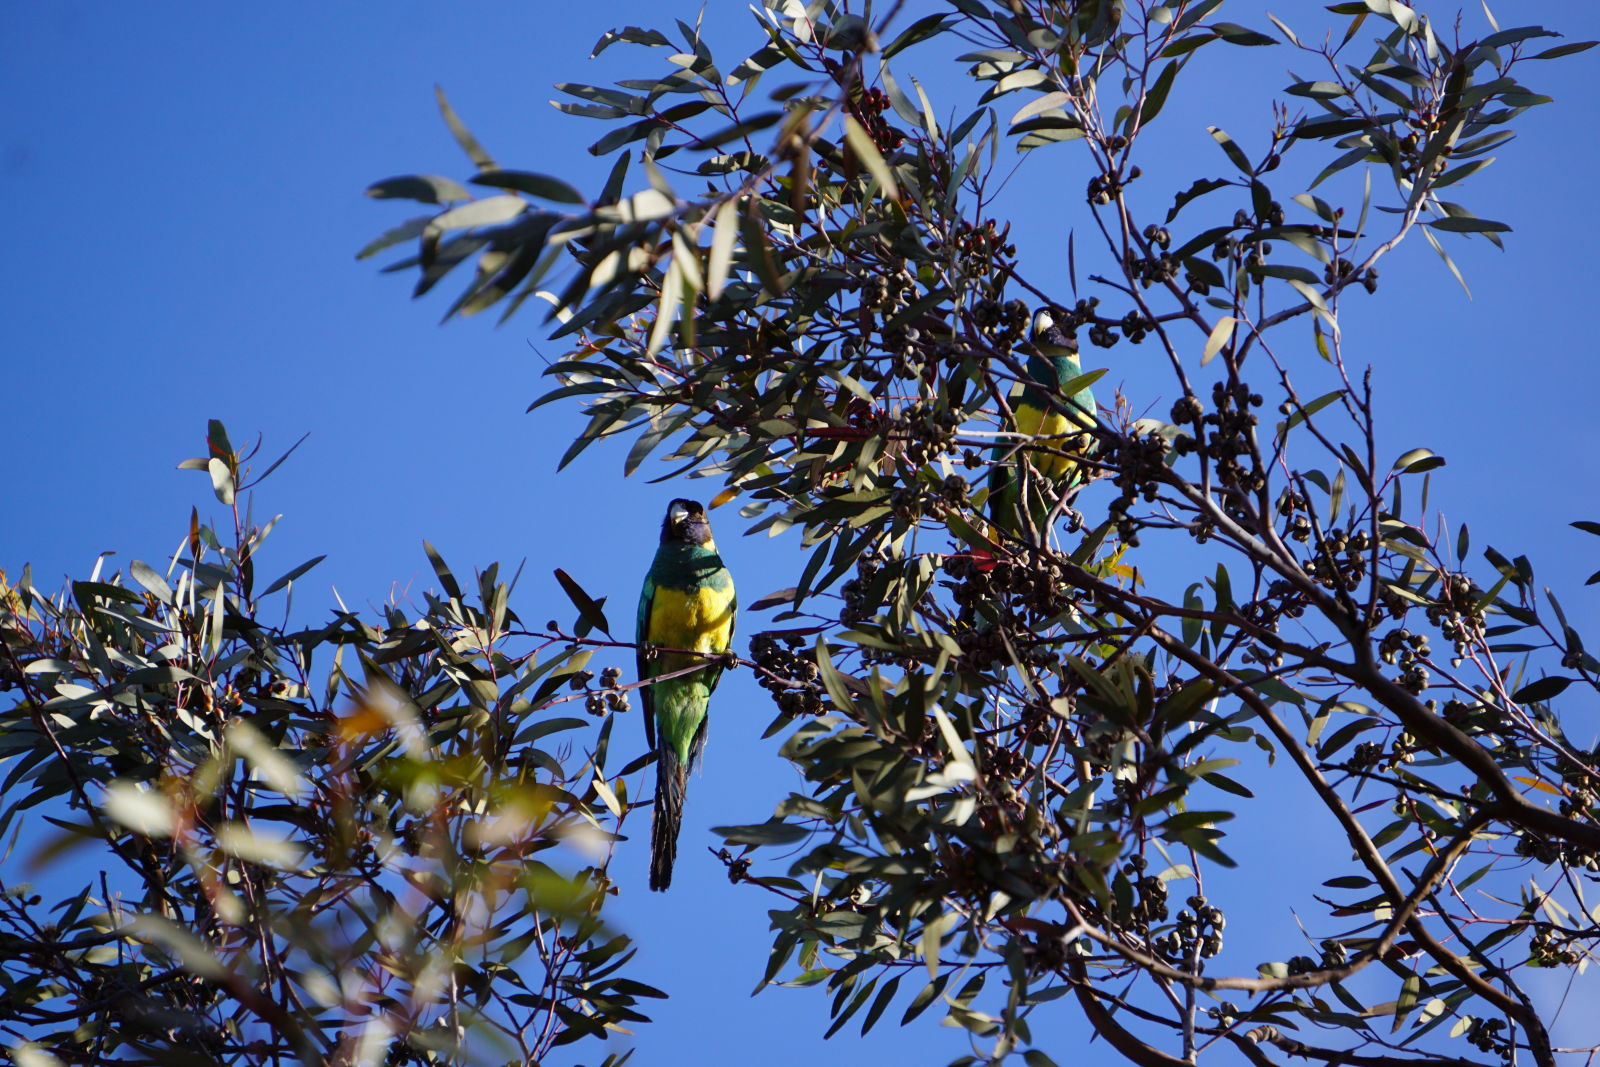 So after chasing them with no success the previous day, we had Ring Necked Parrots in the tree by our campsite.